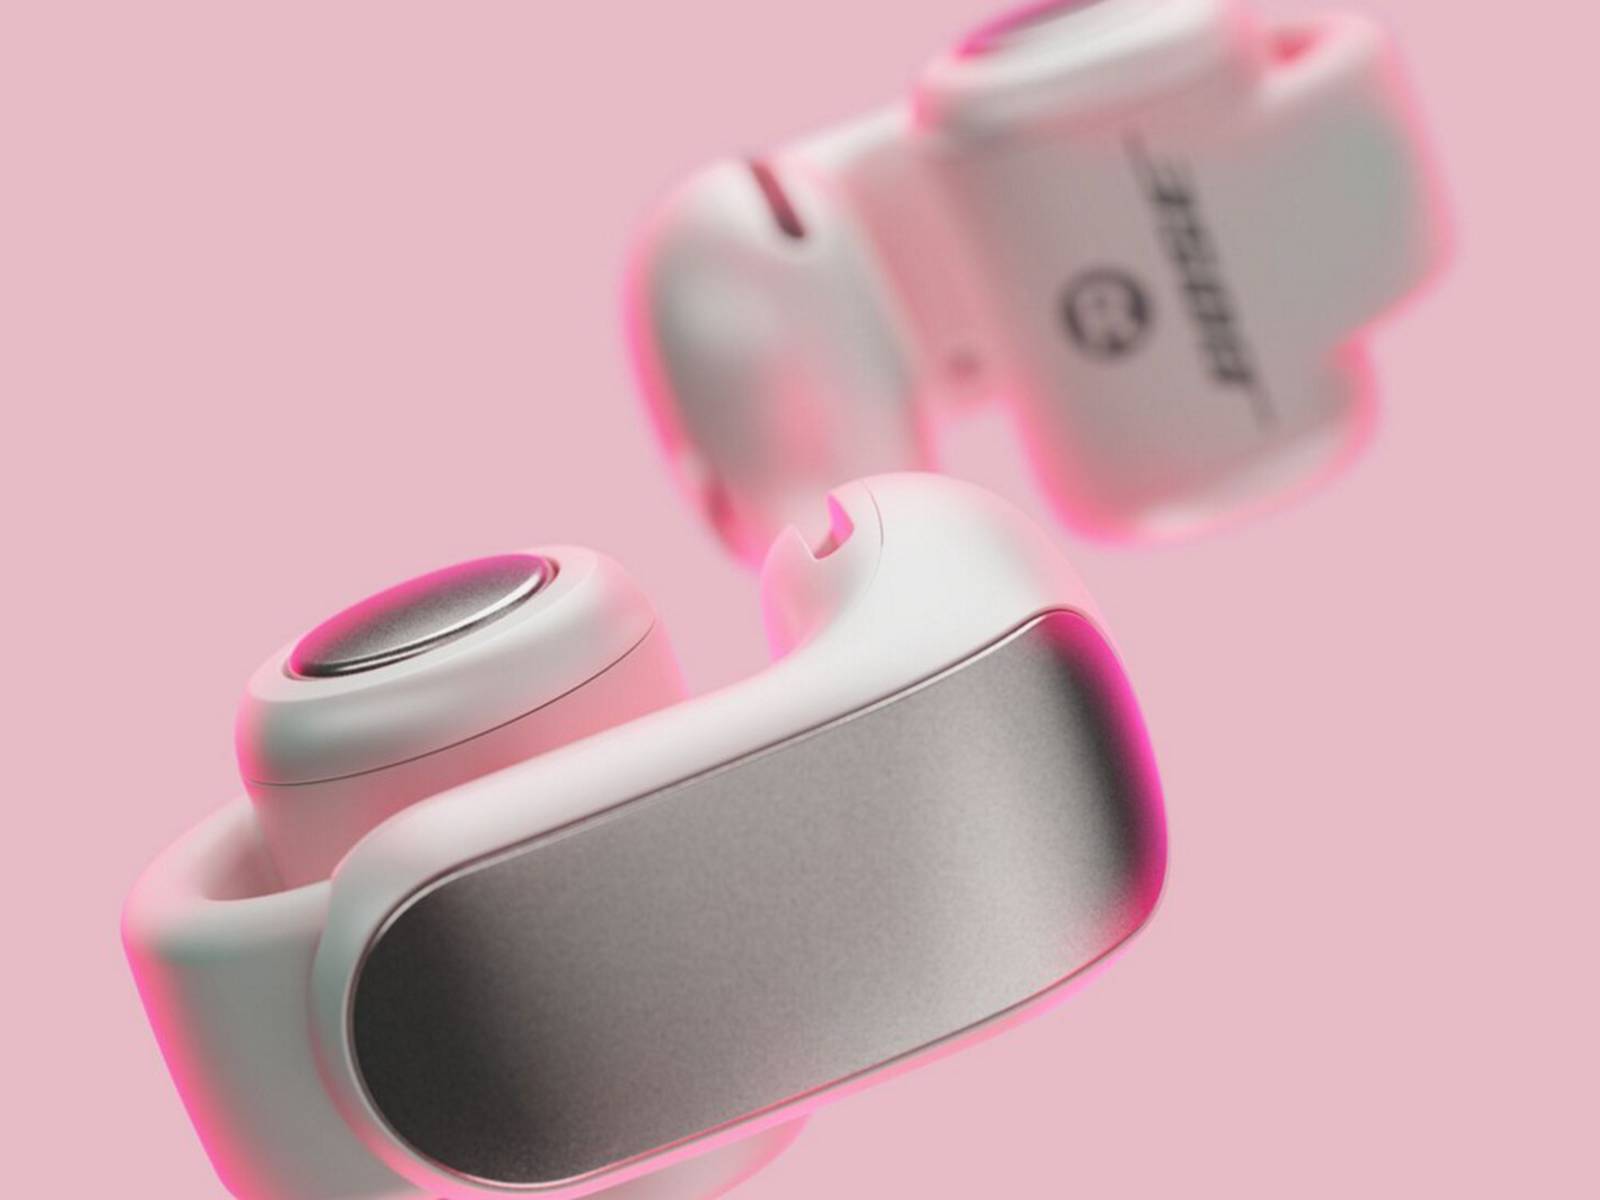 Cuff style ear buds, white buds on a pink background